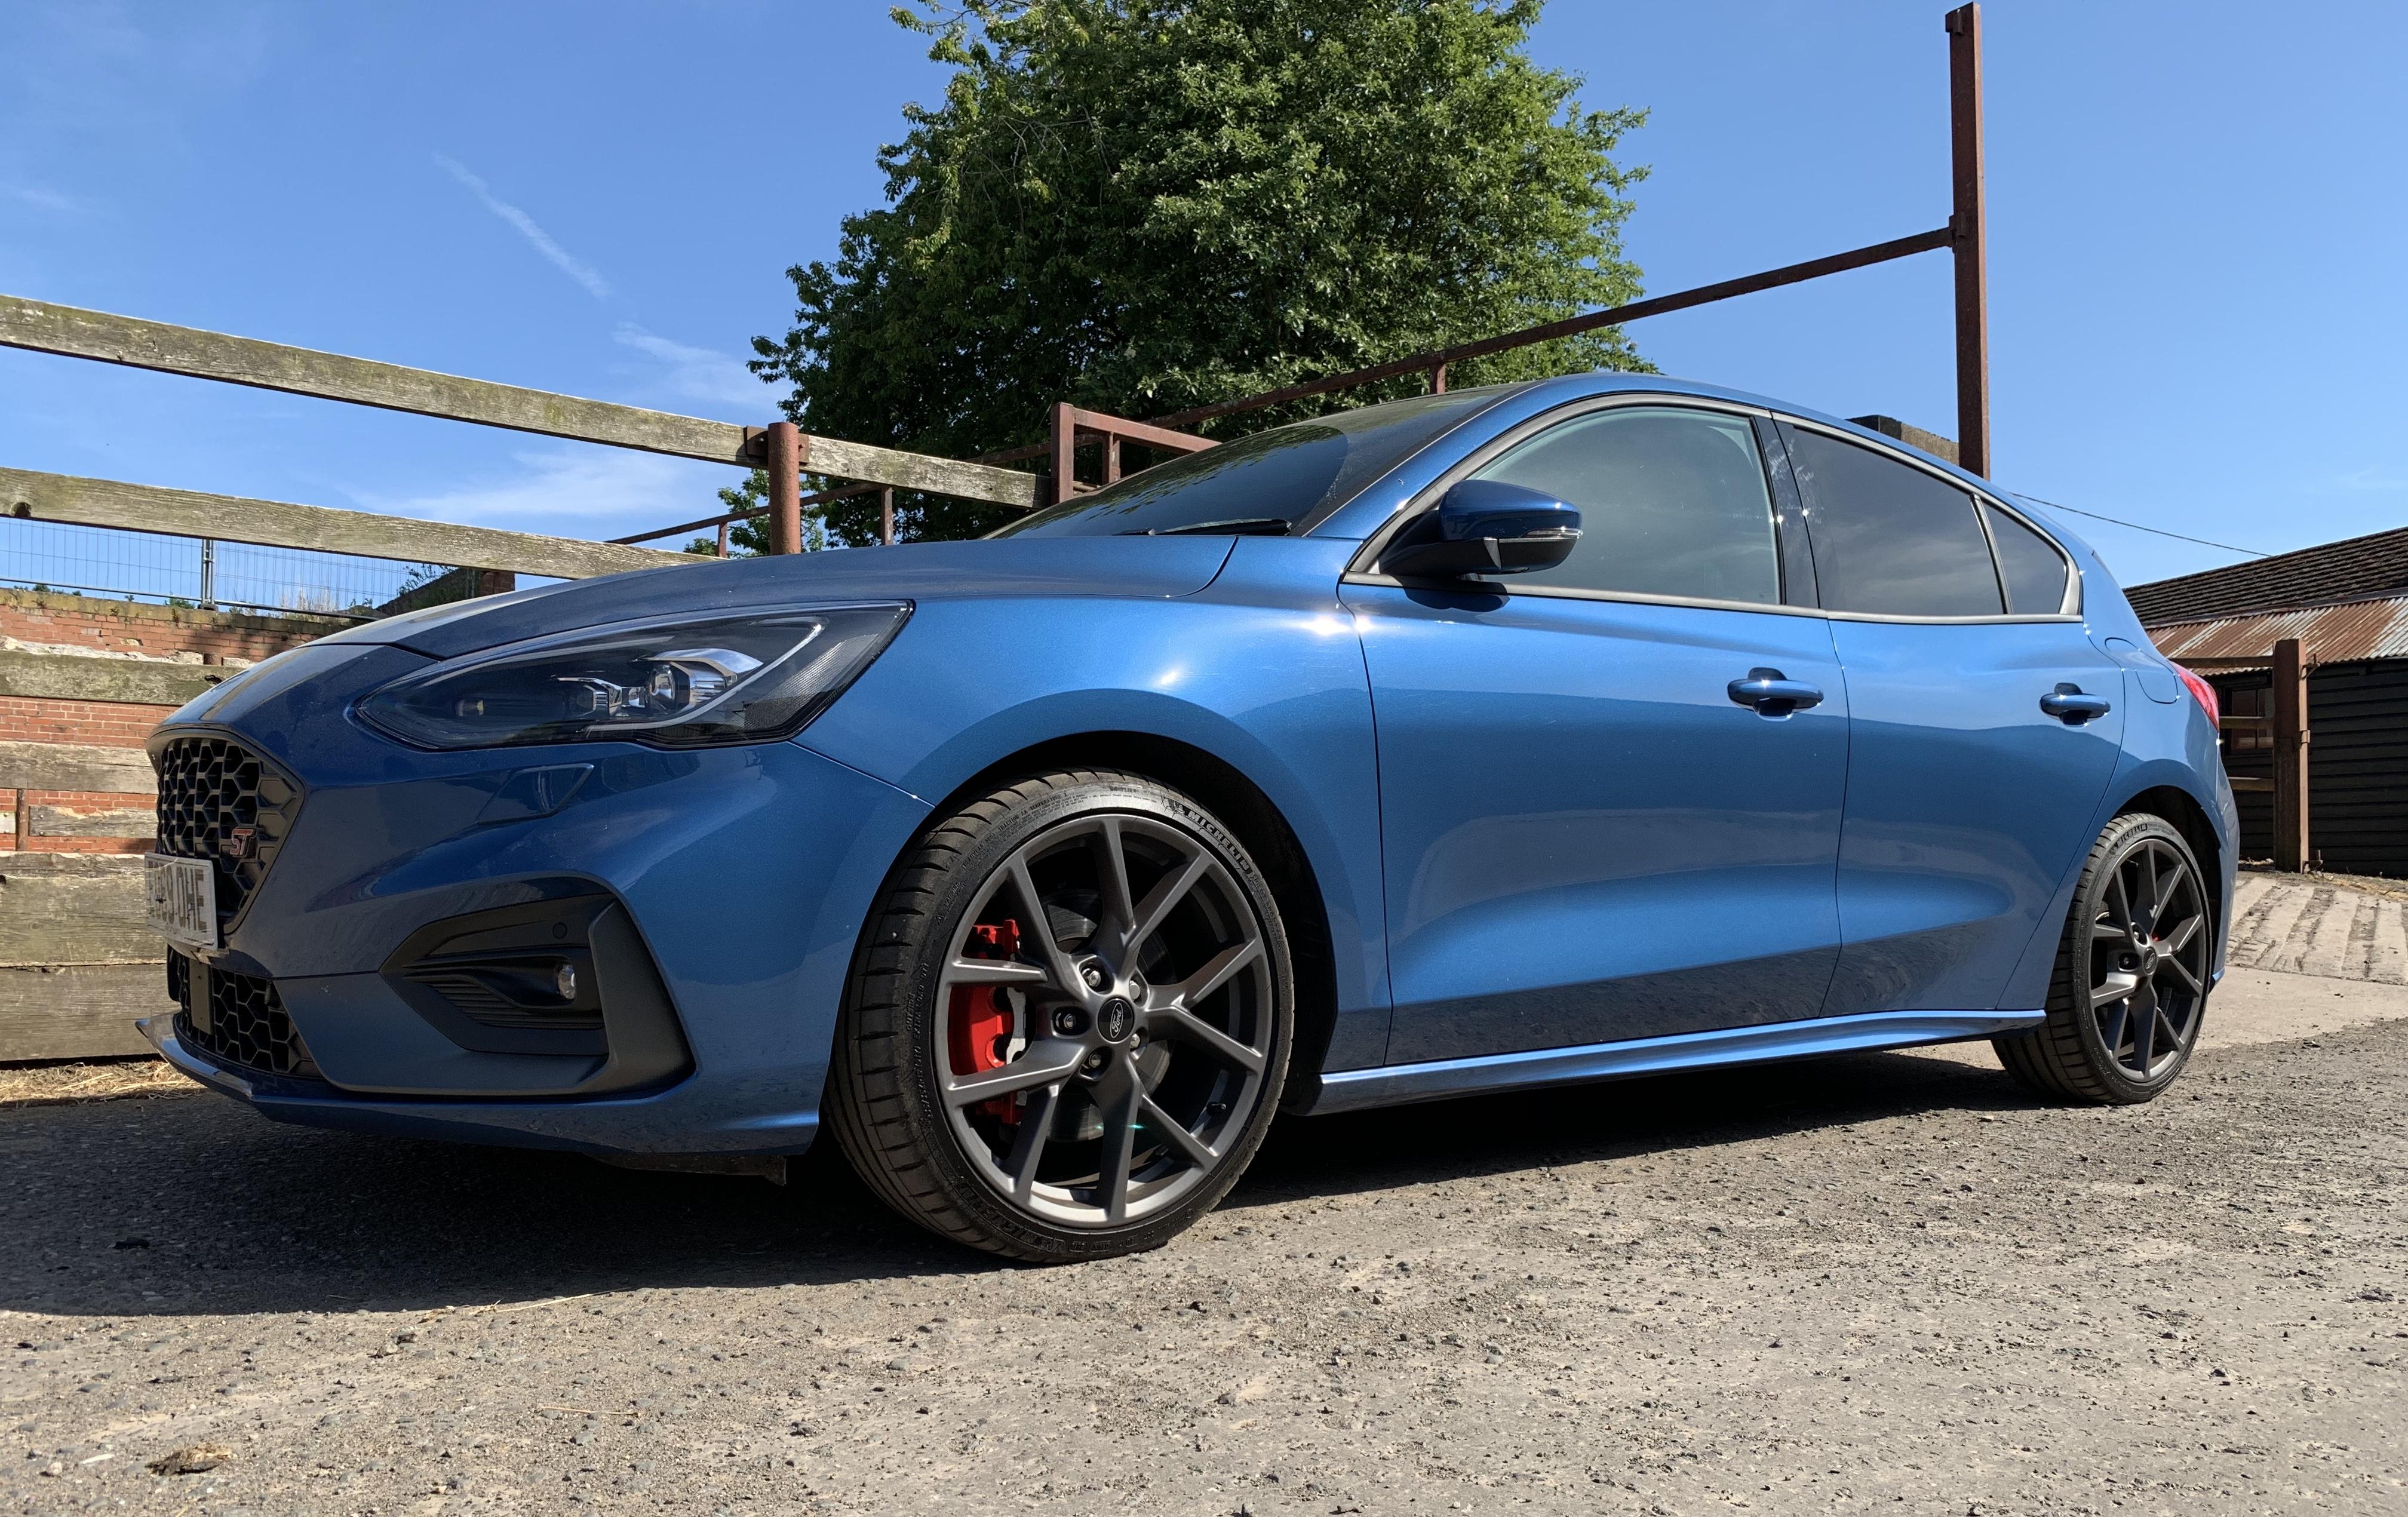 Mountune has given the Mk4 Ford Focus ST 360bhp